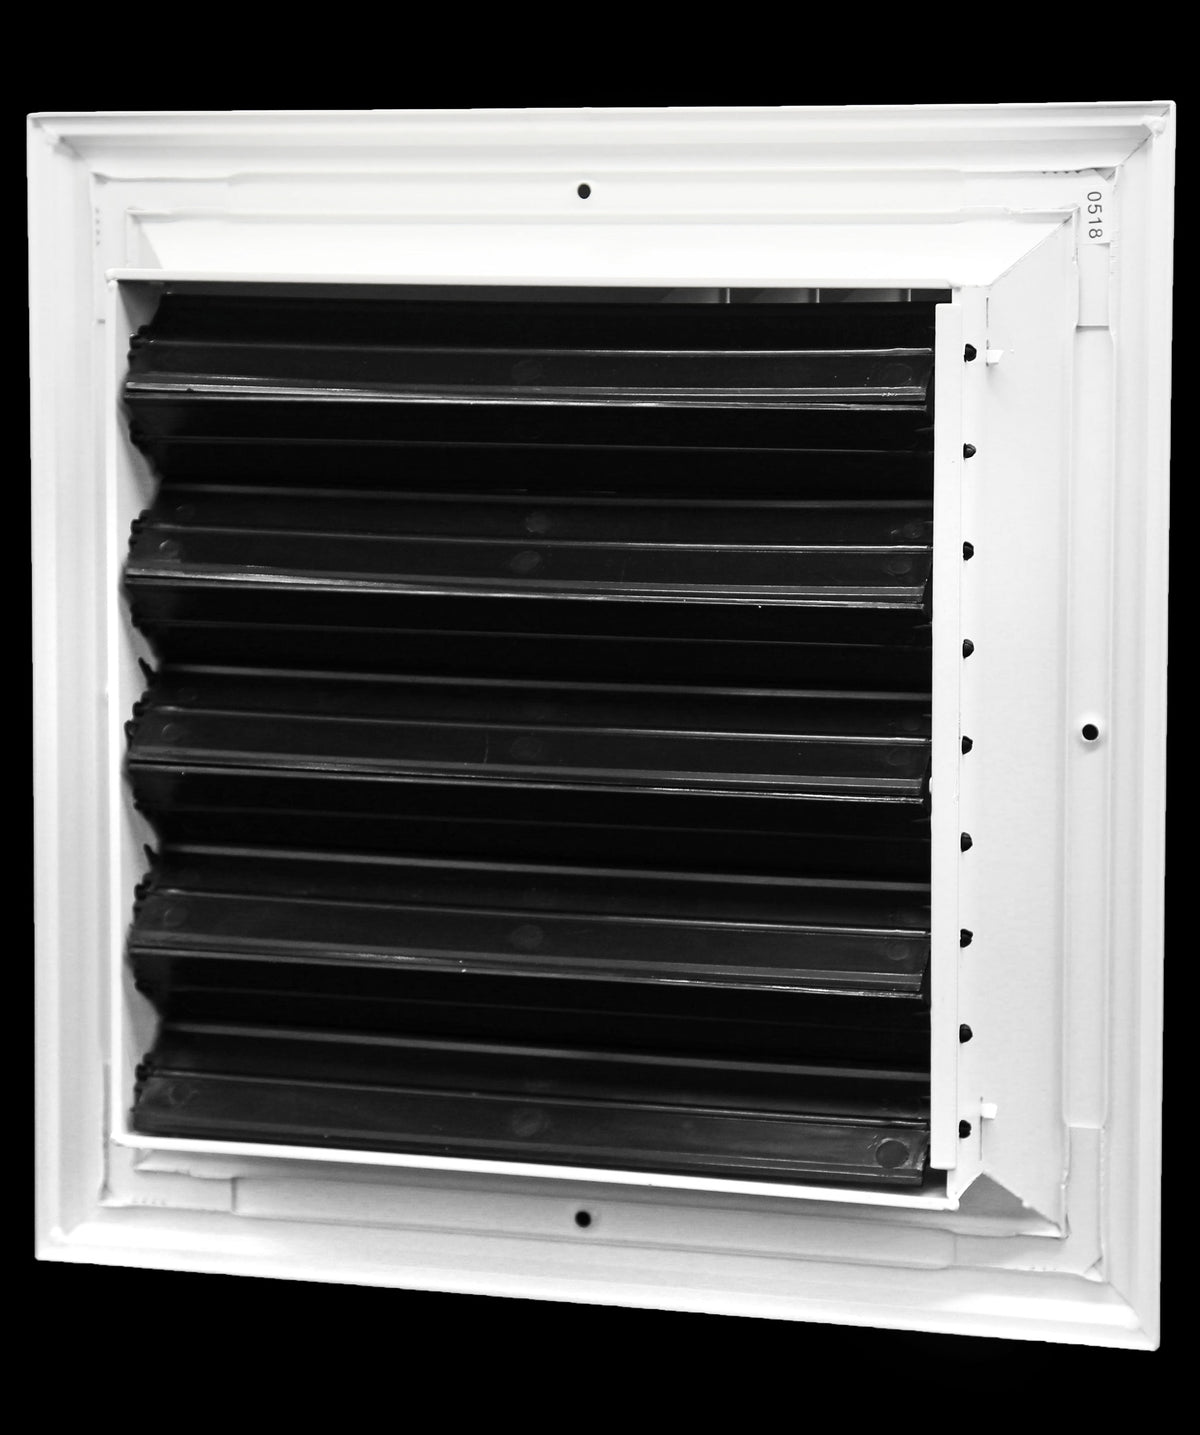 14&quot; x 14&quot; 4-WAY SUPPLY GRILLE - DUCT COVER &amp; DIFFUSER - LOW NOISE - For Ceiling - With Opposing Damper Blades